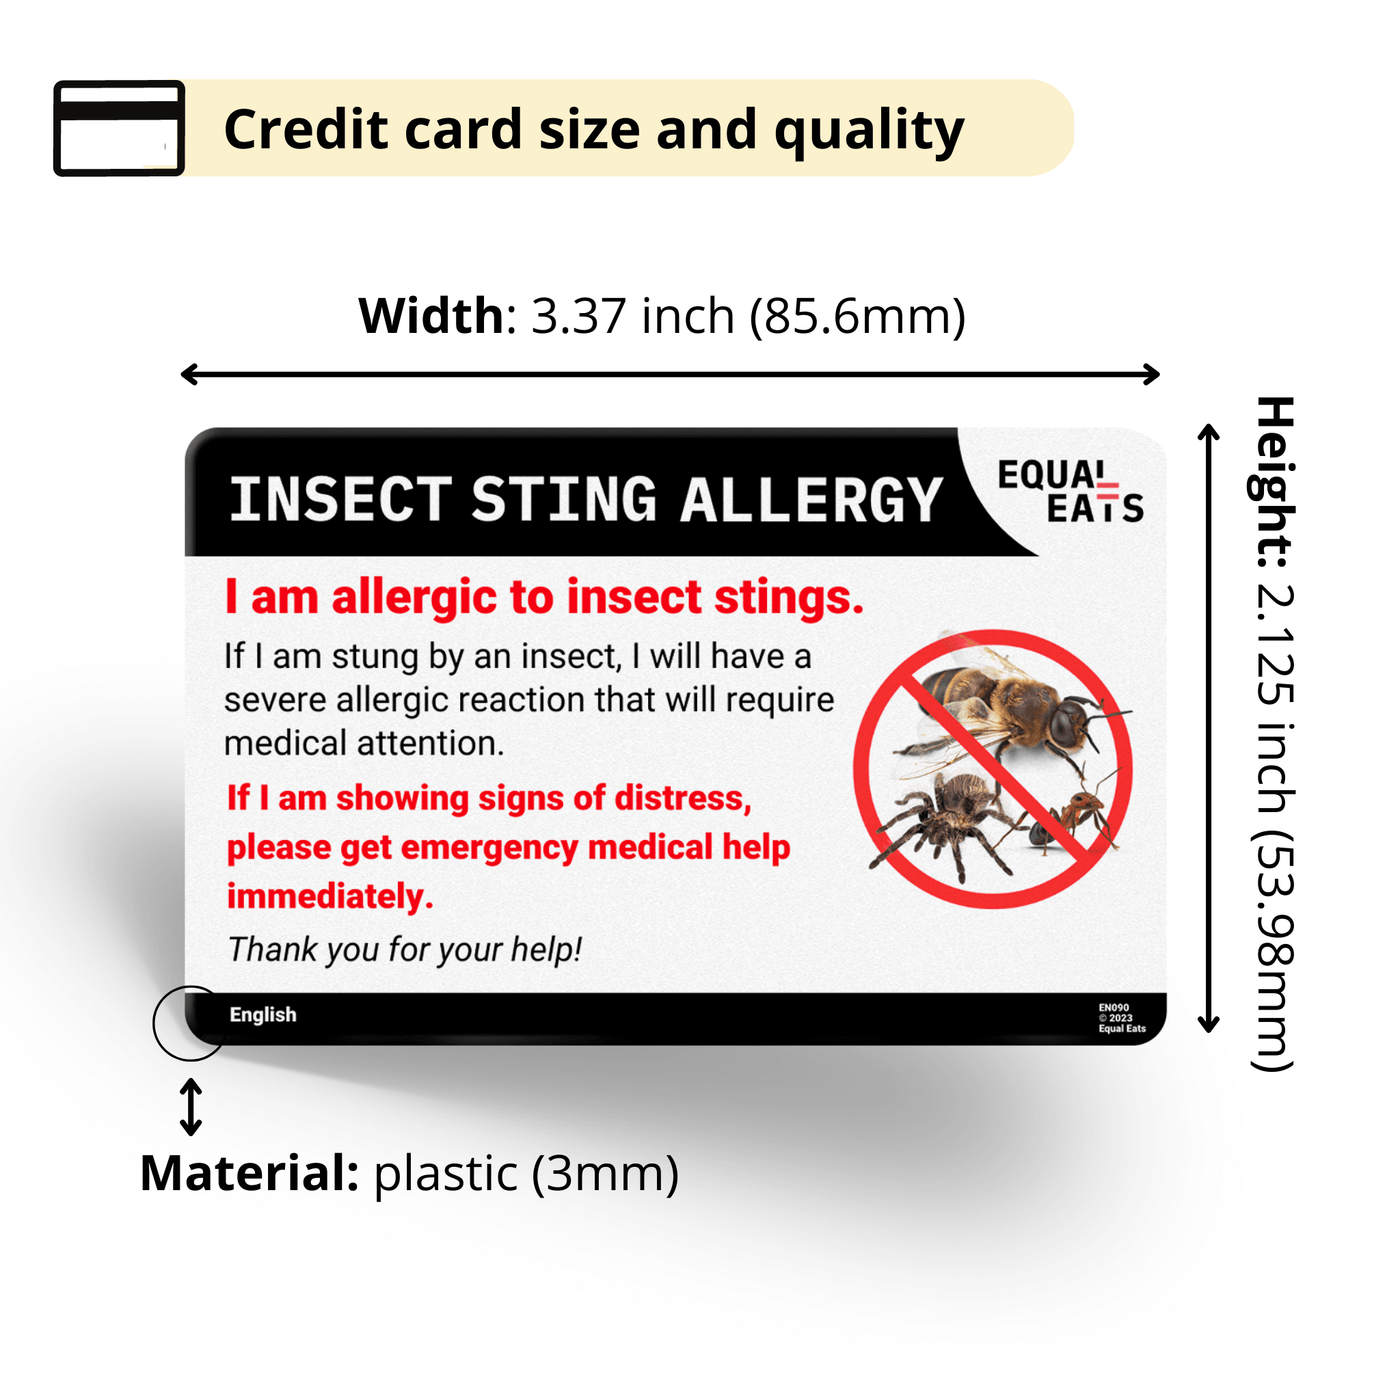 Khmer Insect Sting Allergy Card